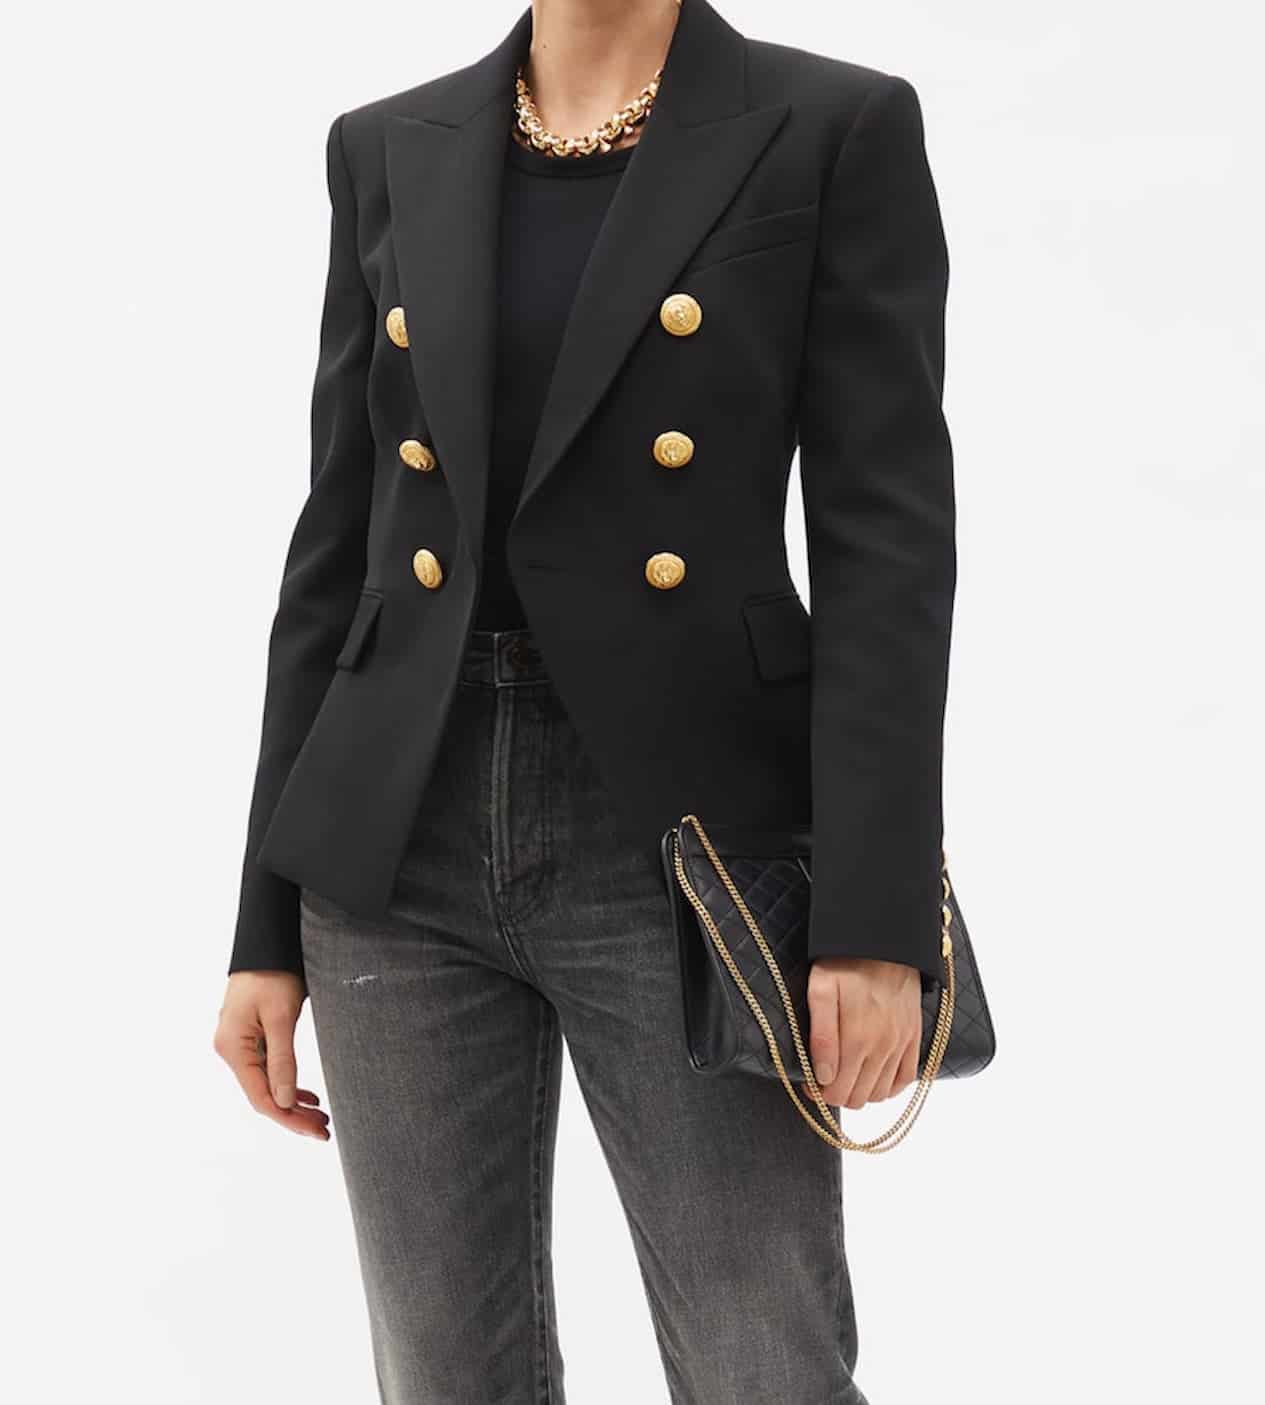 image of a woman wearing a black Balmain blazer with gold buttons and washed black denim jeans